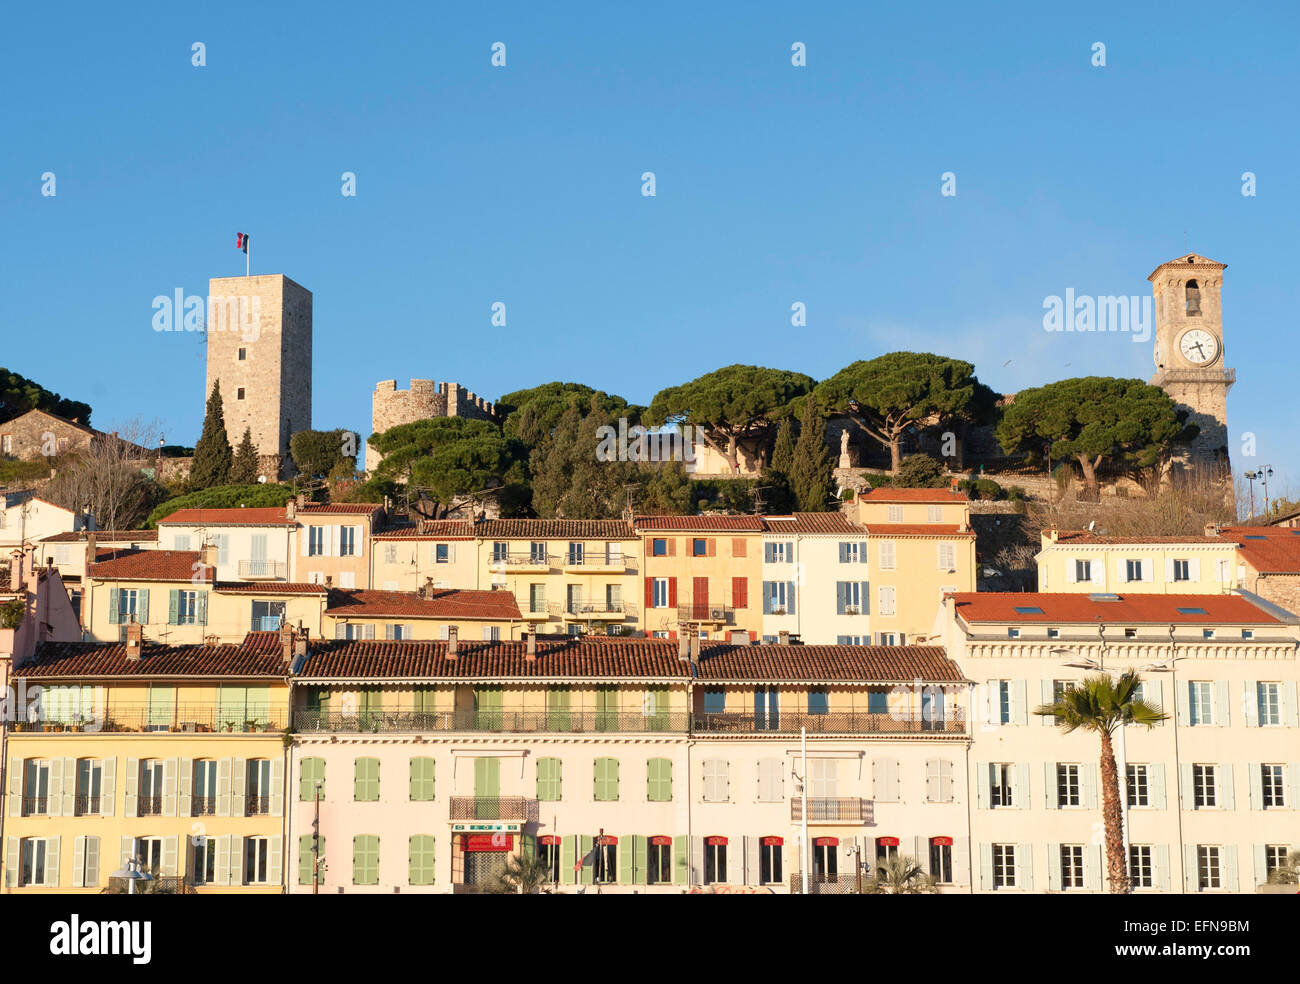 View of the old part of Cannes called Le Suquet, Côte d'Azur, France Stock Photo